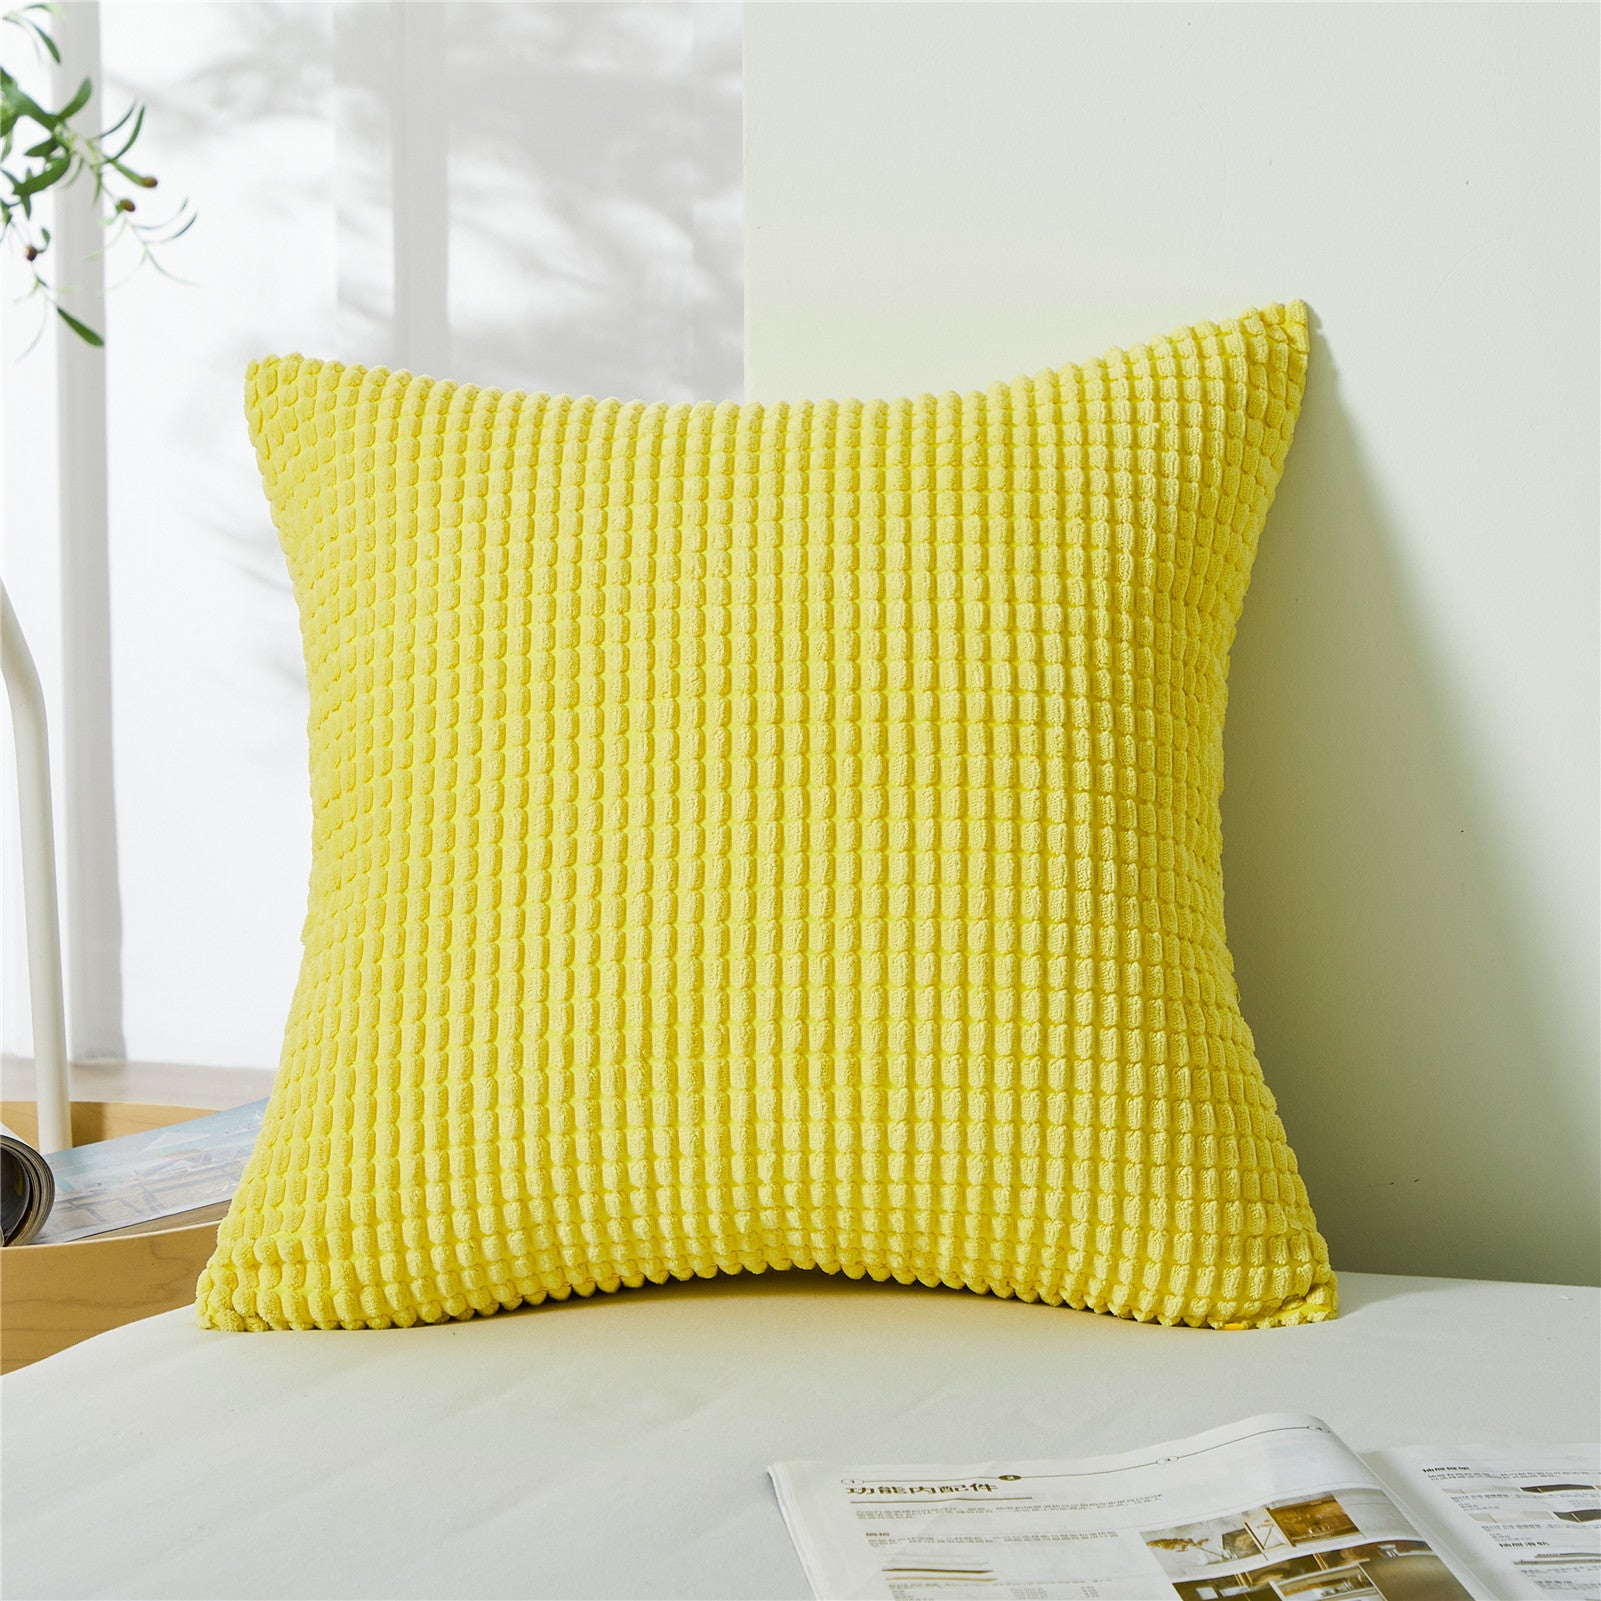 Corduroy Solid Color Decorative Pillow Cover with Regular Grains for Sofa Living Room